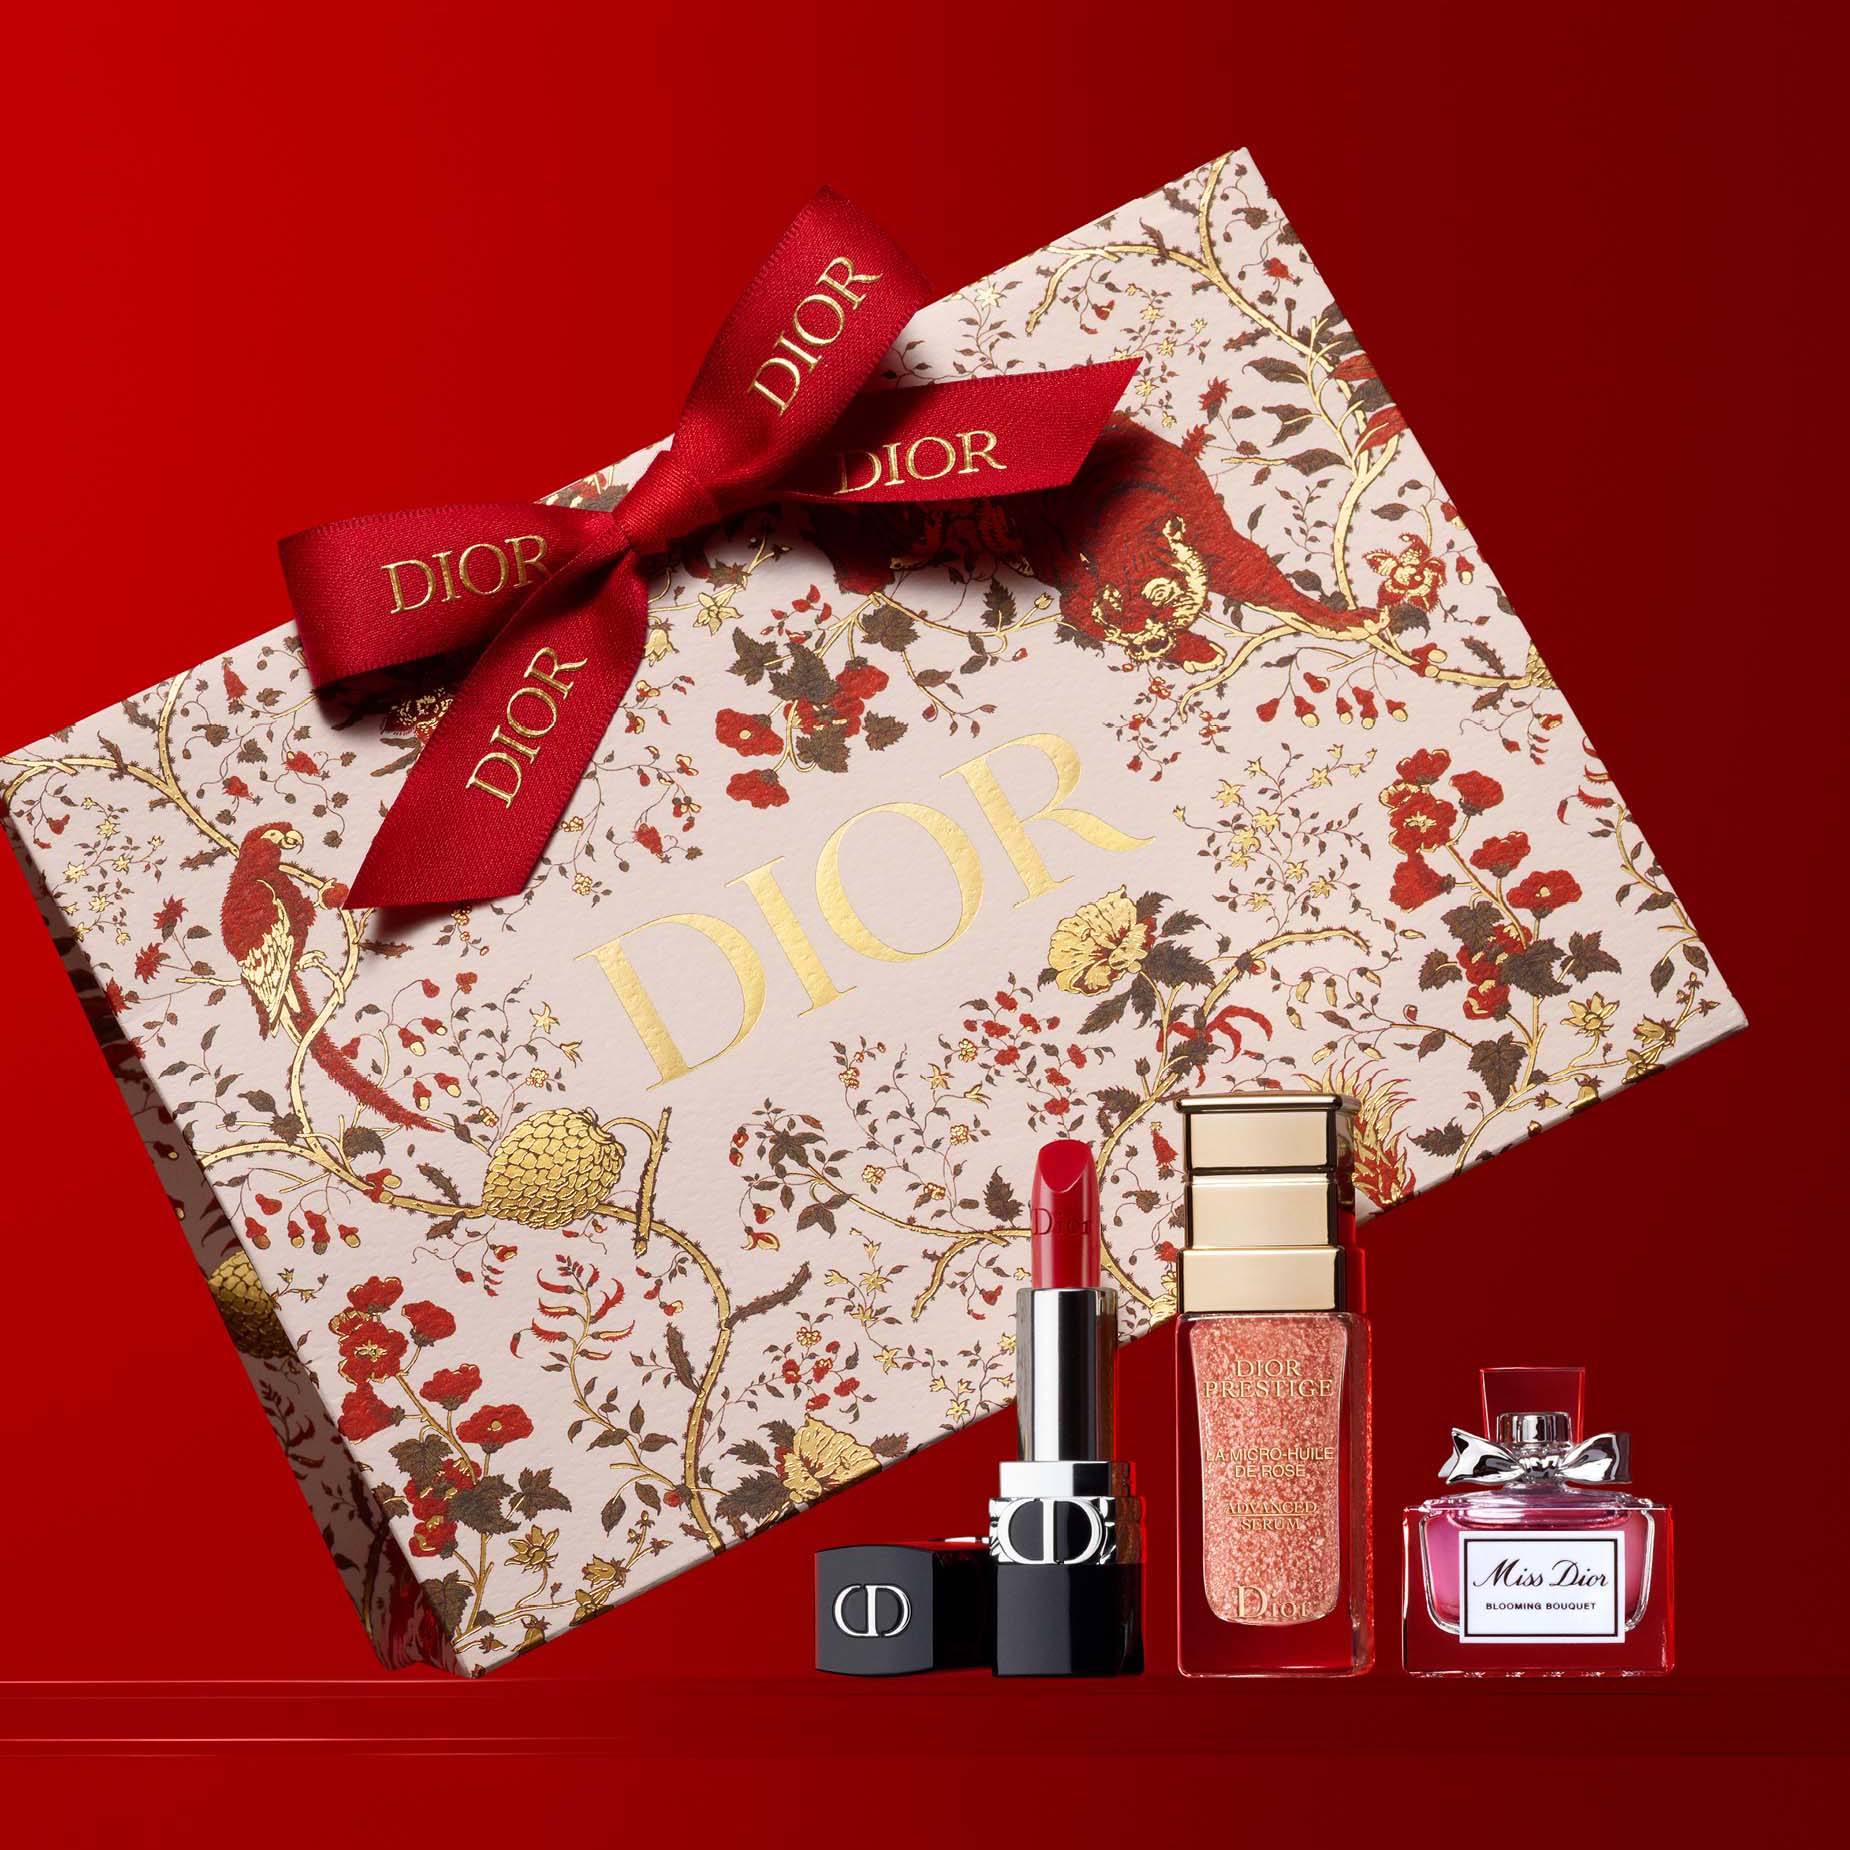 This is the Miss Dior Gift Set gift diorbeauty Lets talk about that box    Dior promo promo codes Dior gift with purchase Use my  Instagram